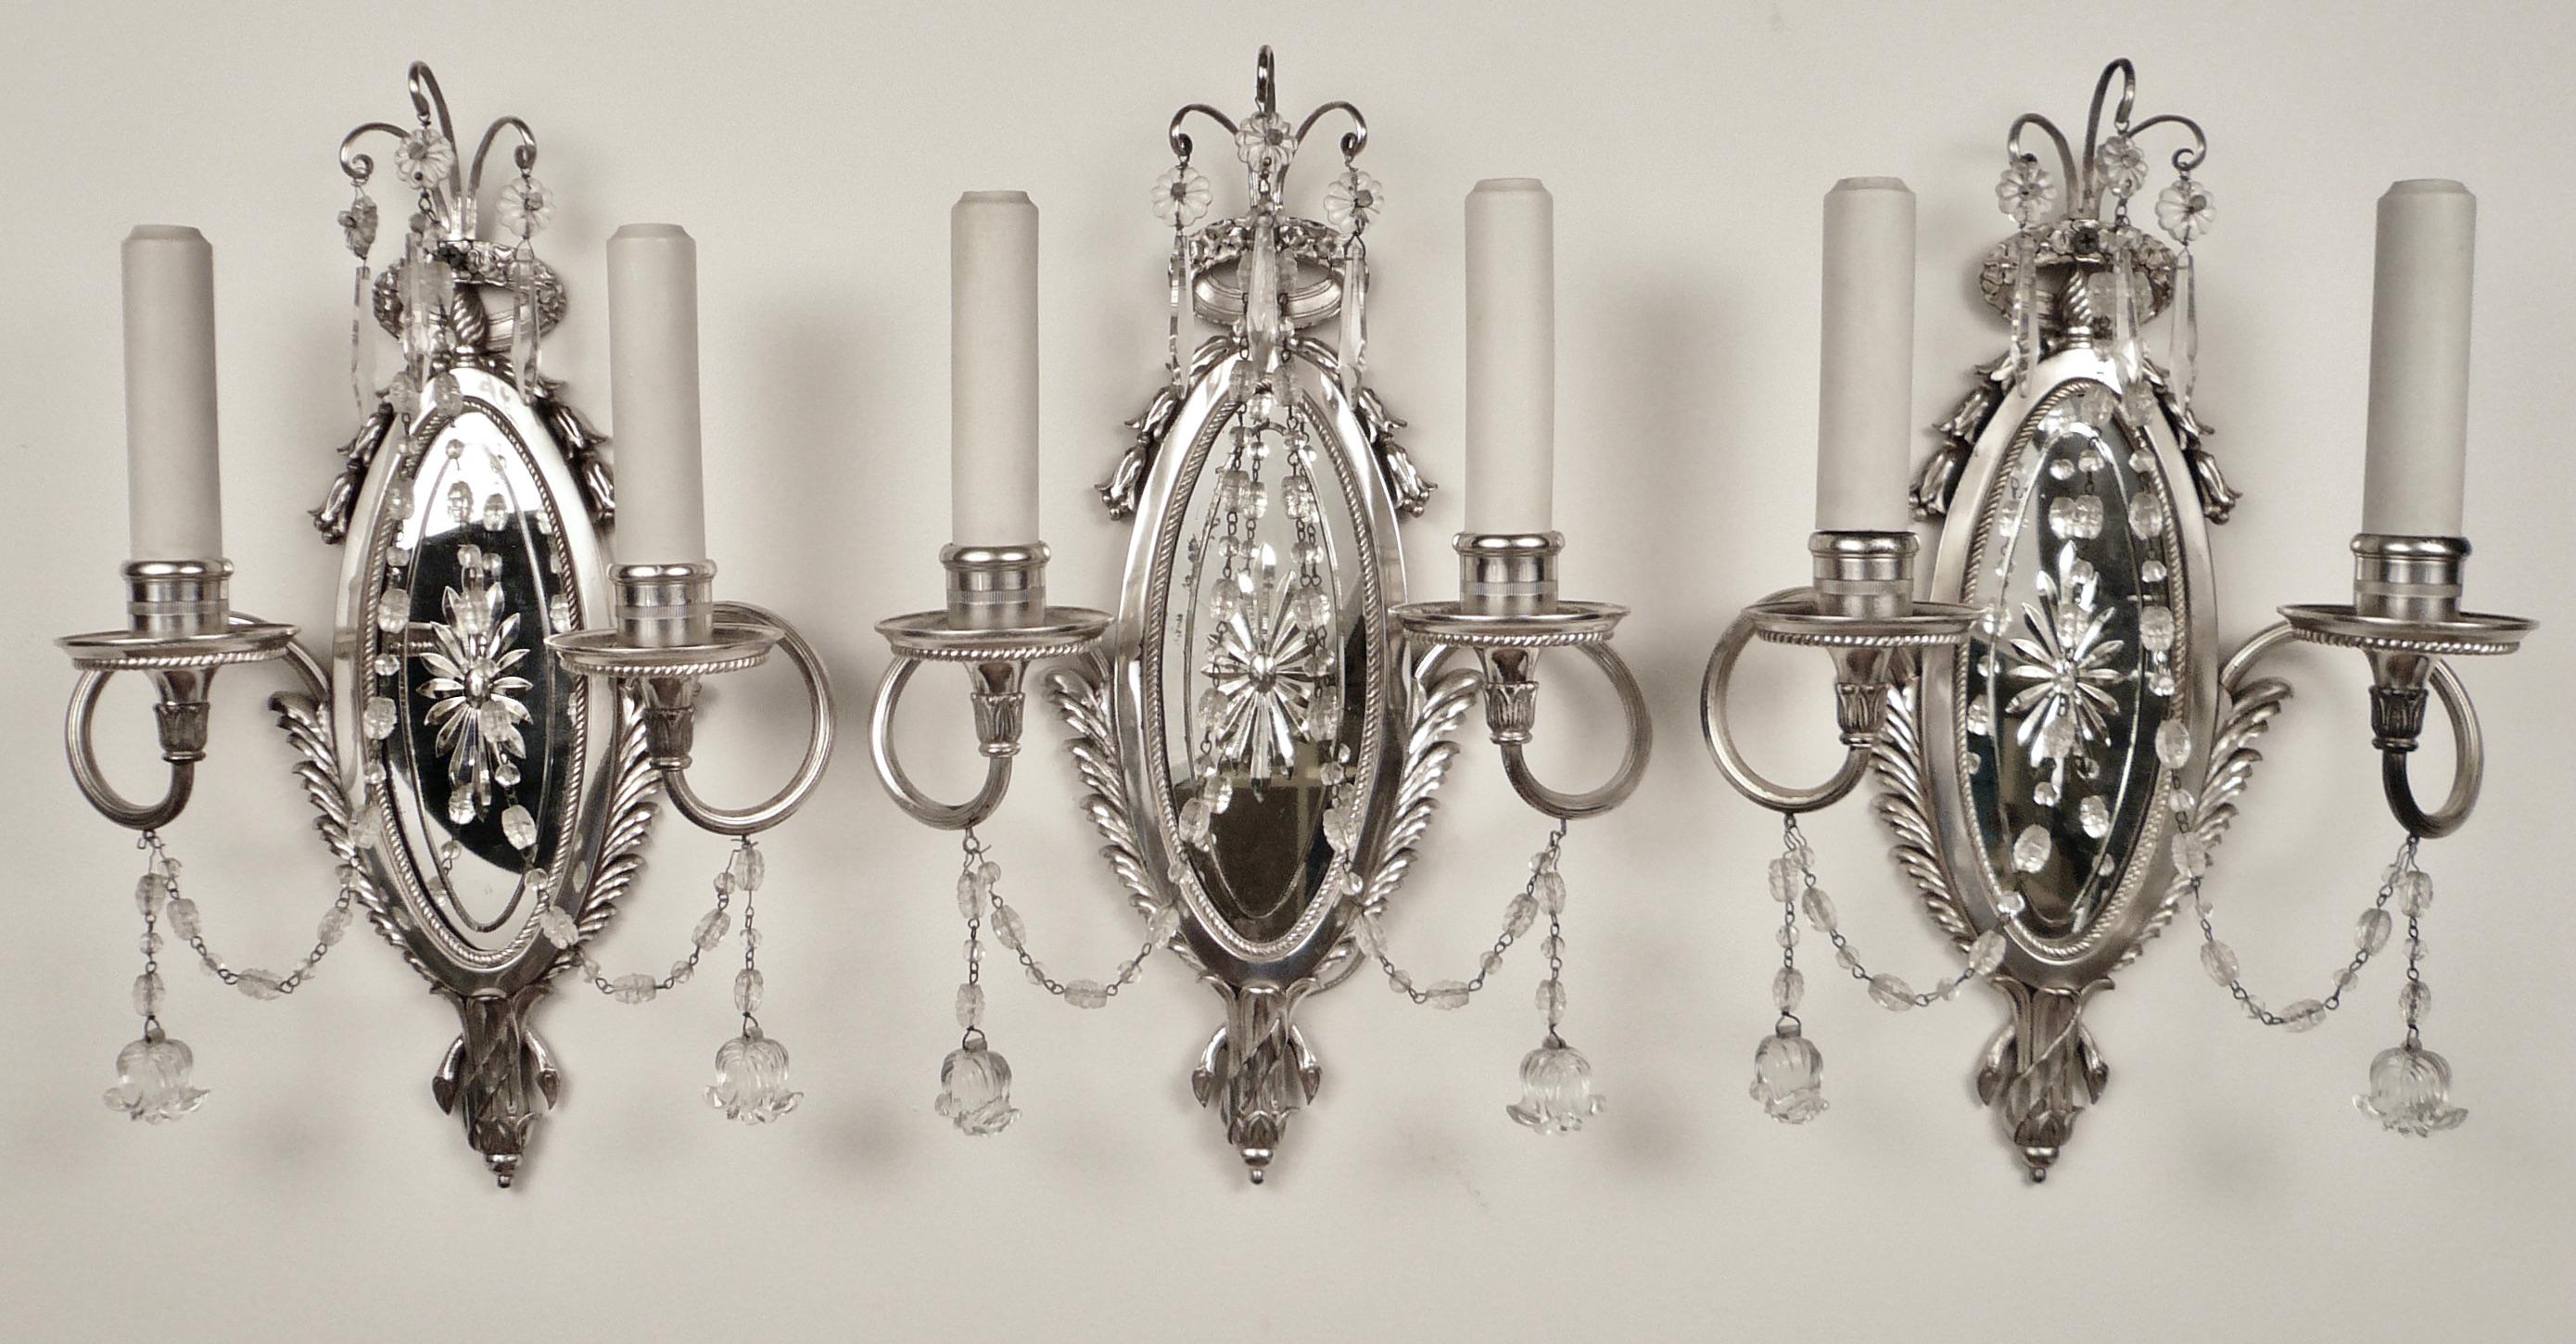 This set of three Caldwell sconces feature classic Georgian motifs made popular by Robert Adam.
They include palm and acanthus leaves, bellflowers and oval wheel cut mirrored backs.